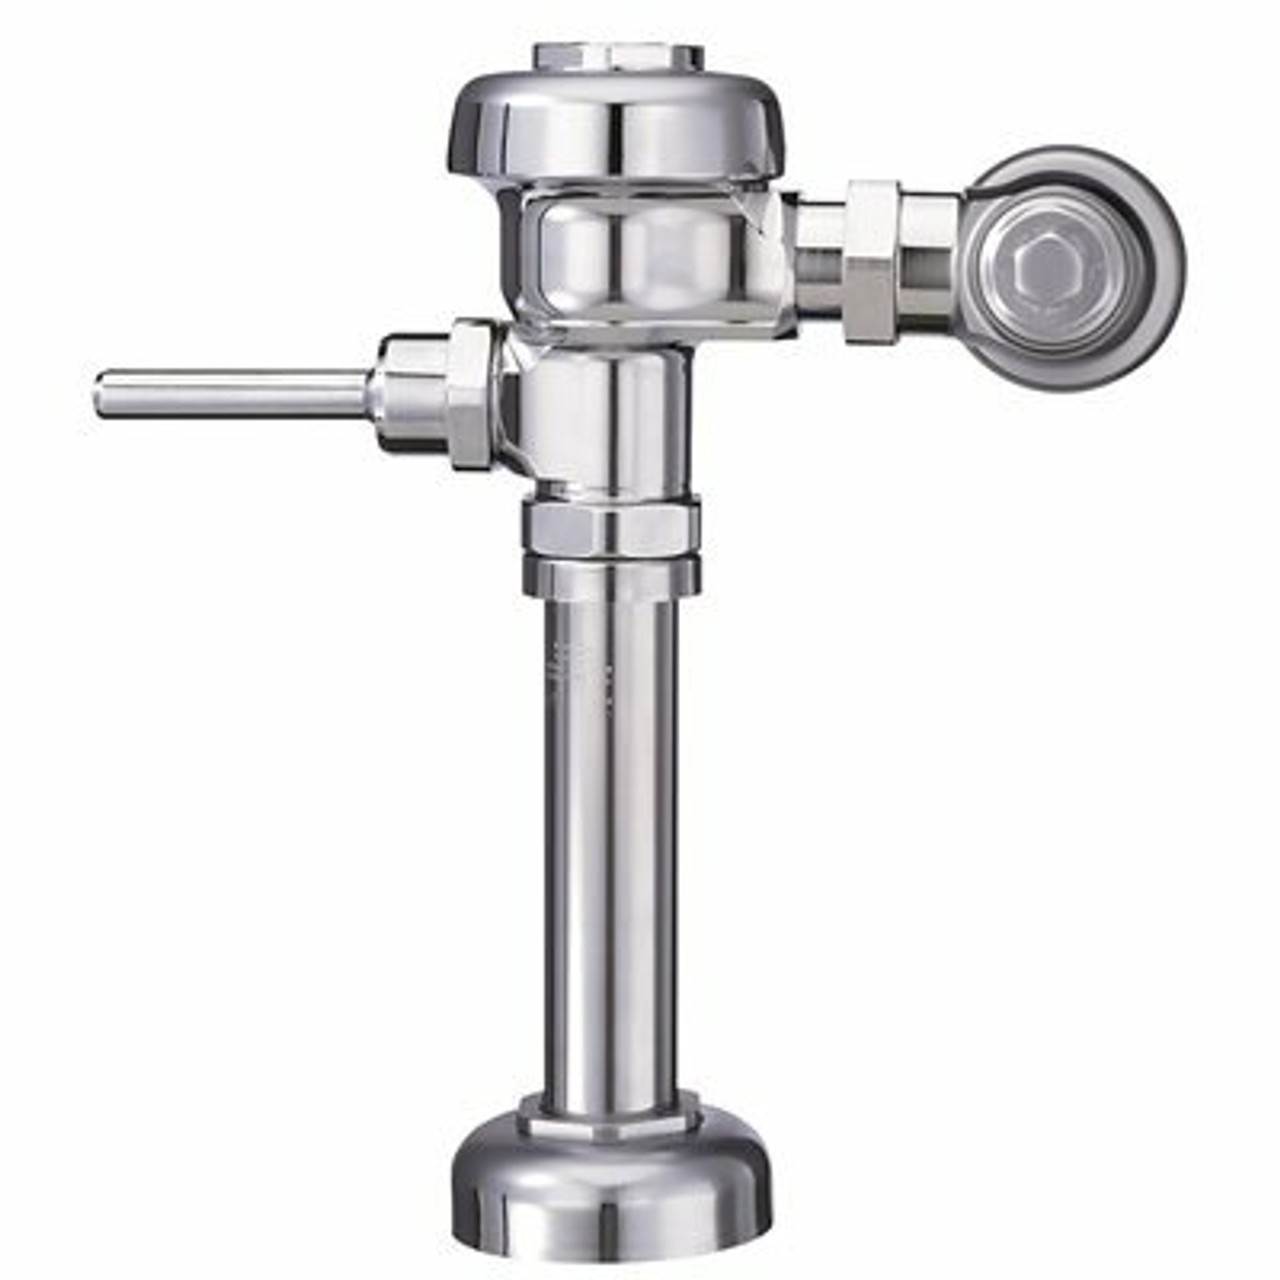 Sloan Regal 113-1.6 Xl, 3080242, 1.6 Gpf Exposed Water Closet Flushometer For Floor Or Wall Mounted 1-1/2 In. Top Spud